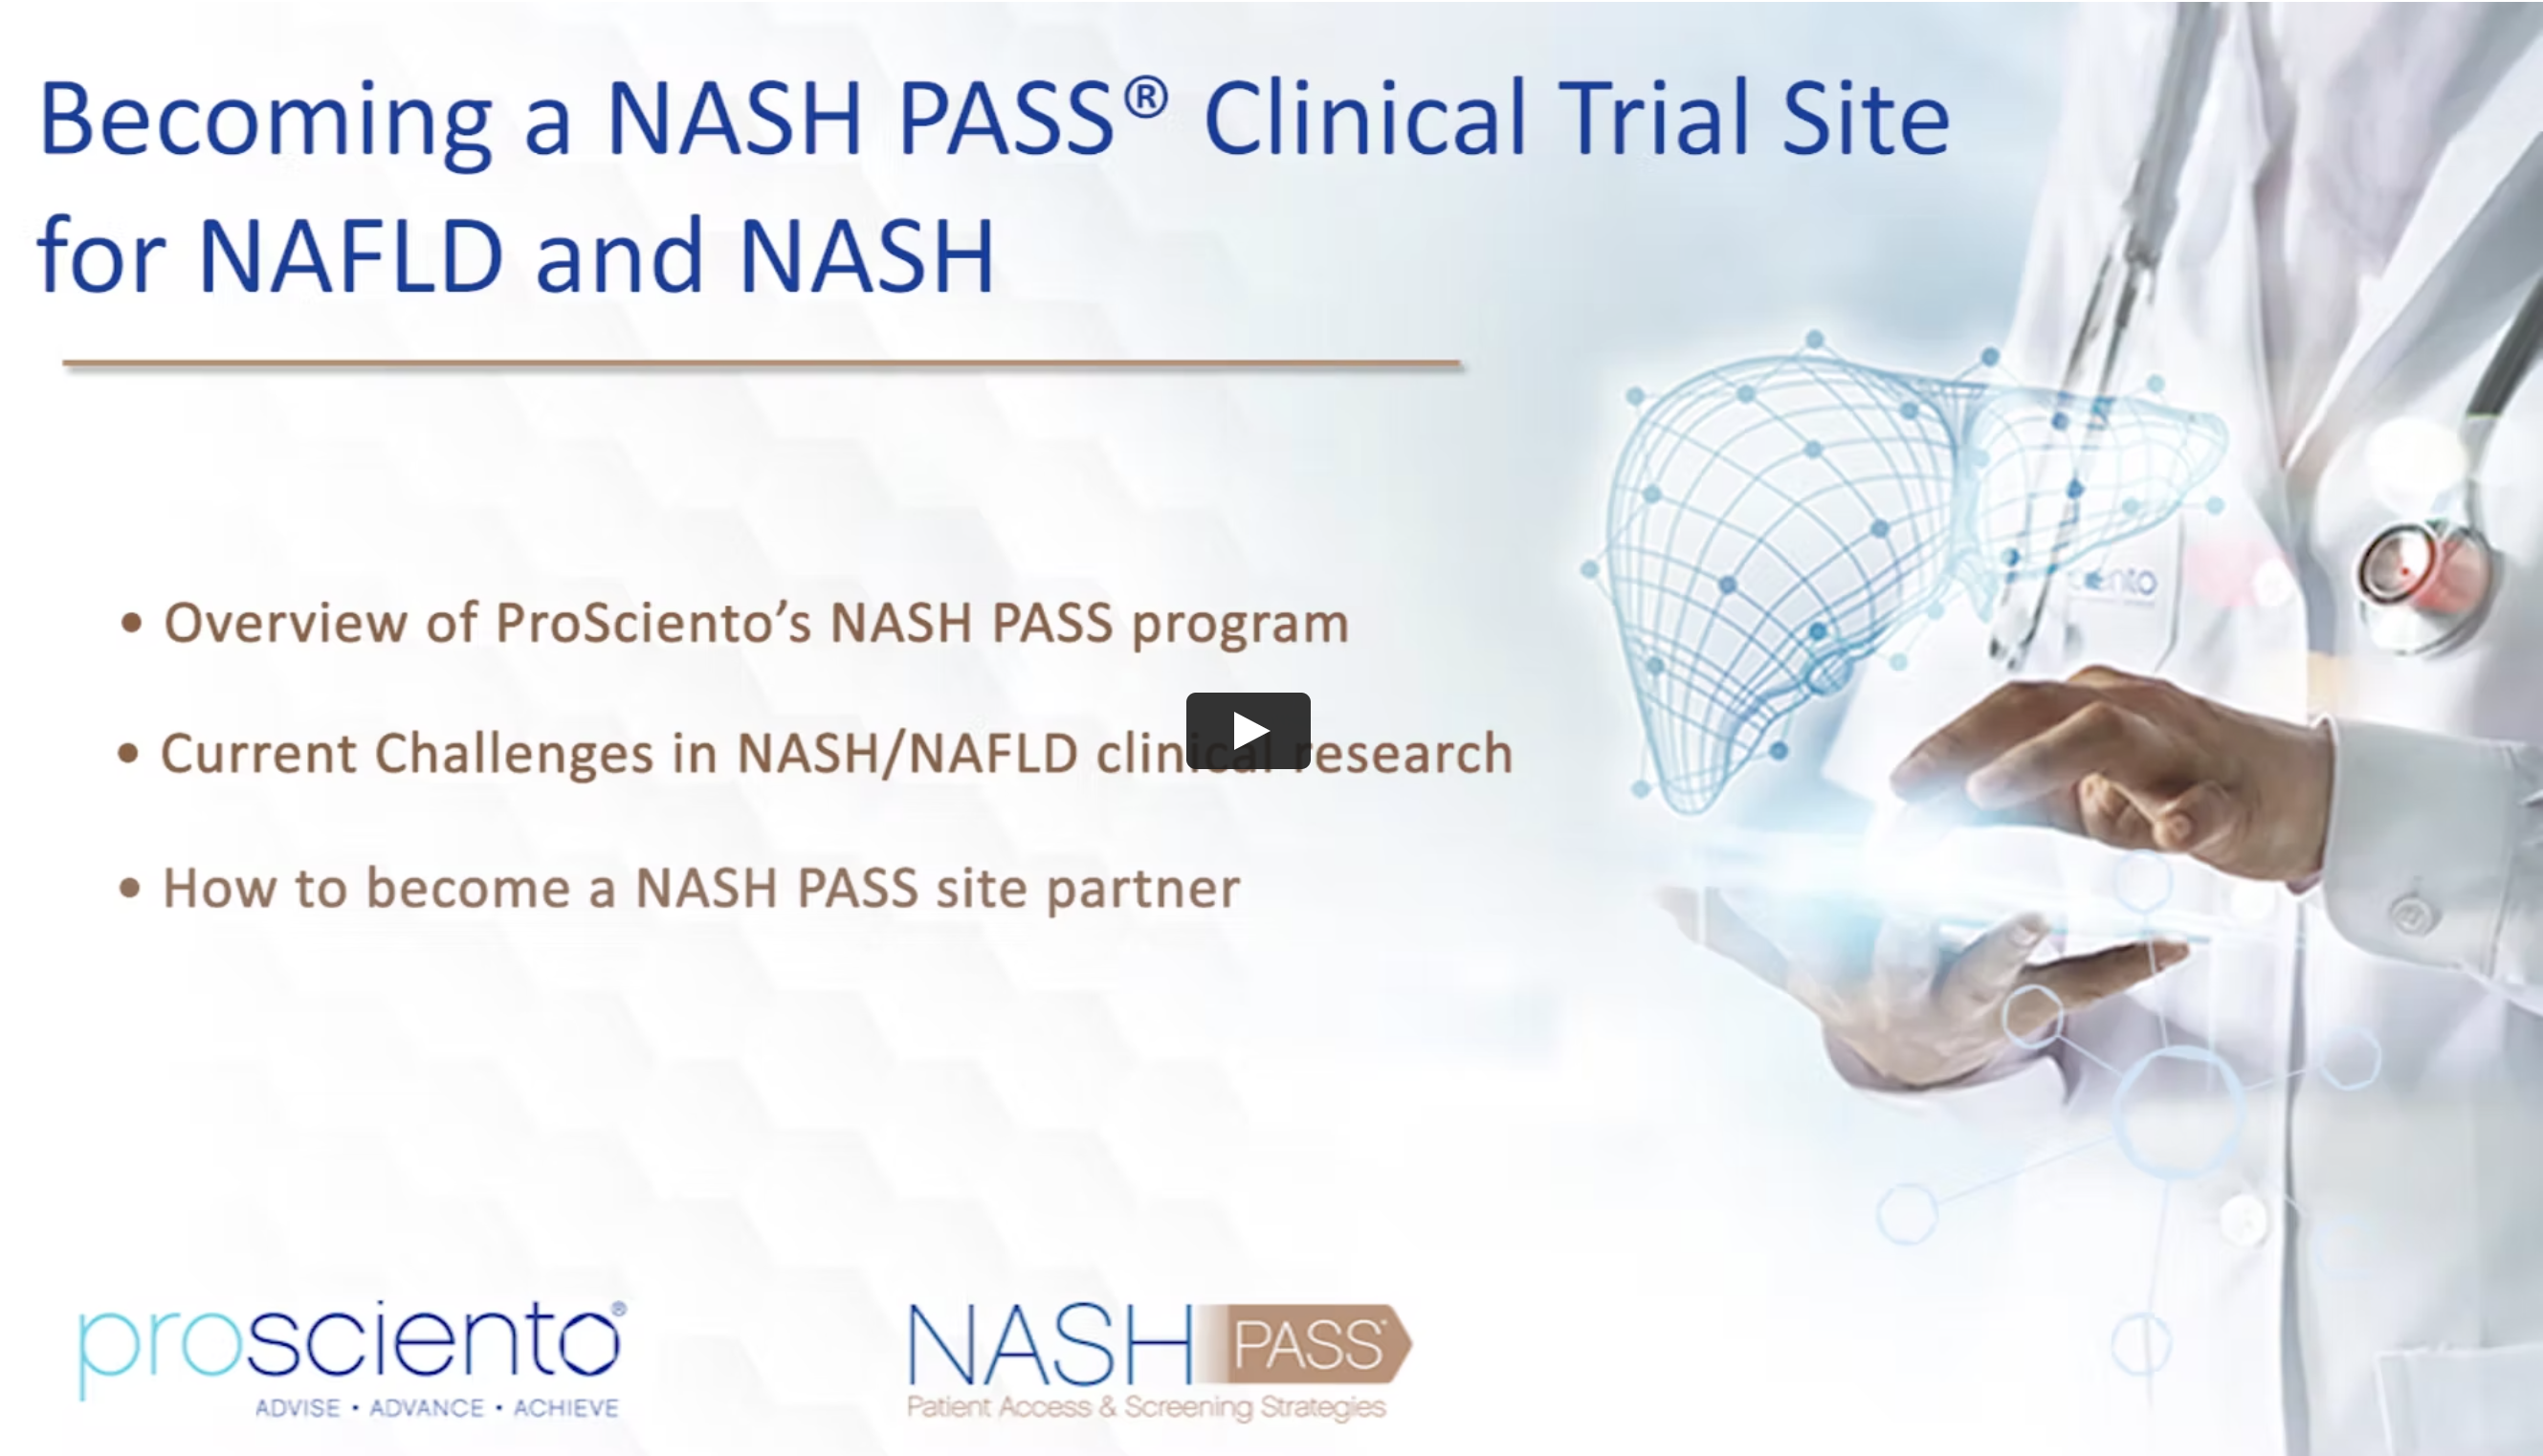 image of Becoming a NASH PASS® Clinical Trial Site for NAFLD and NASH